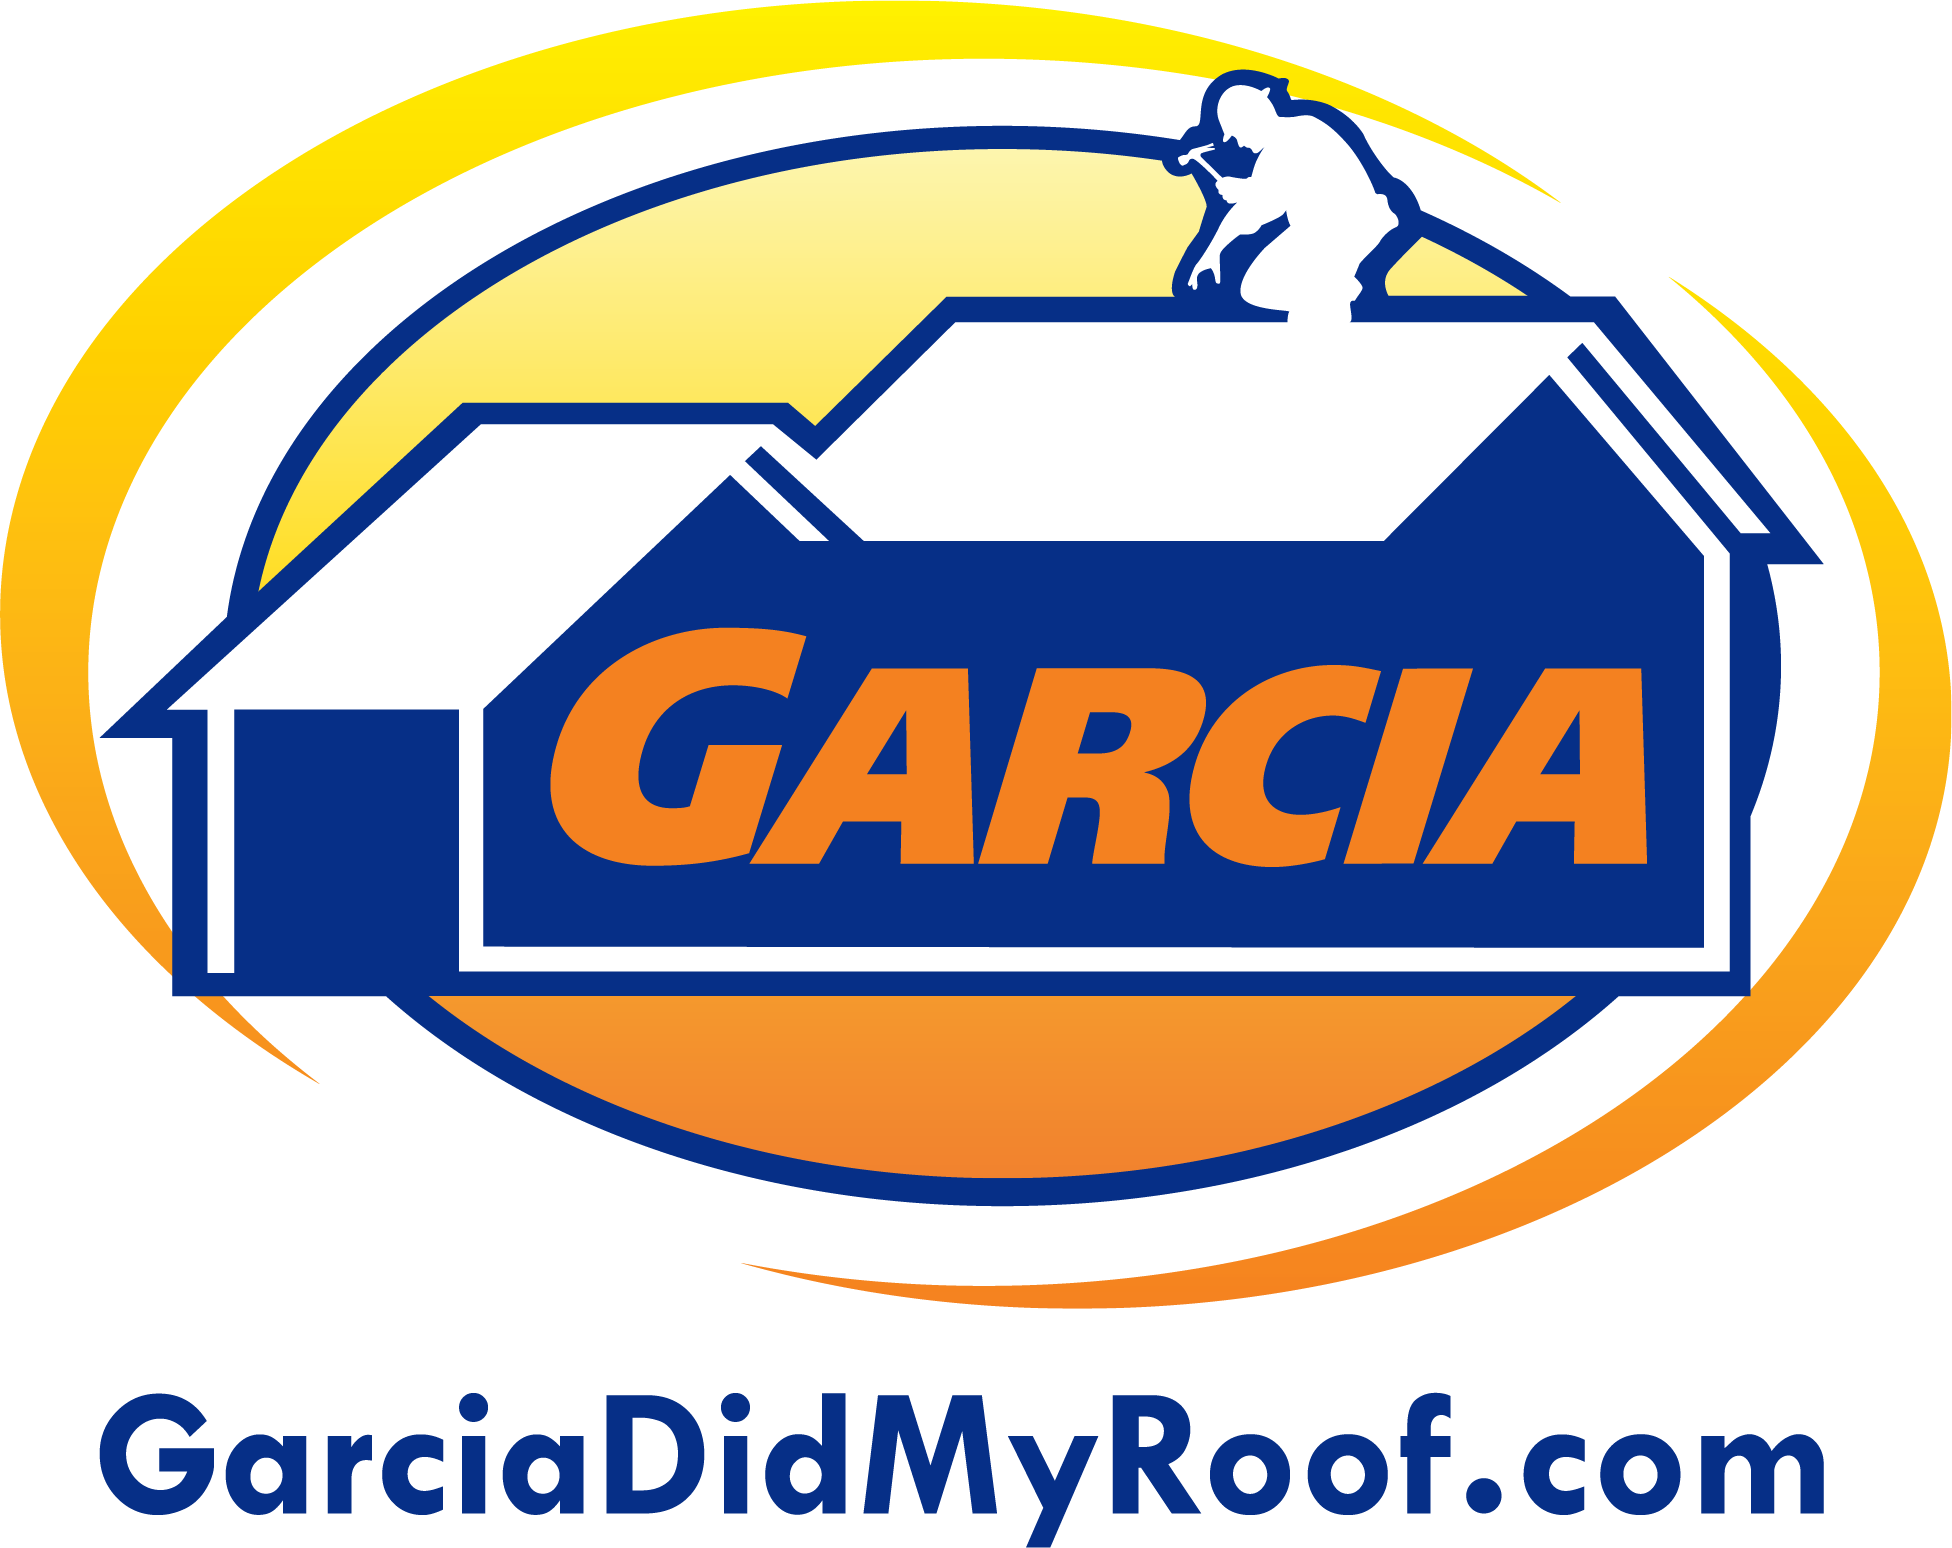 Garcia Roofing roofing company in Louisiana